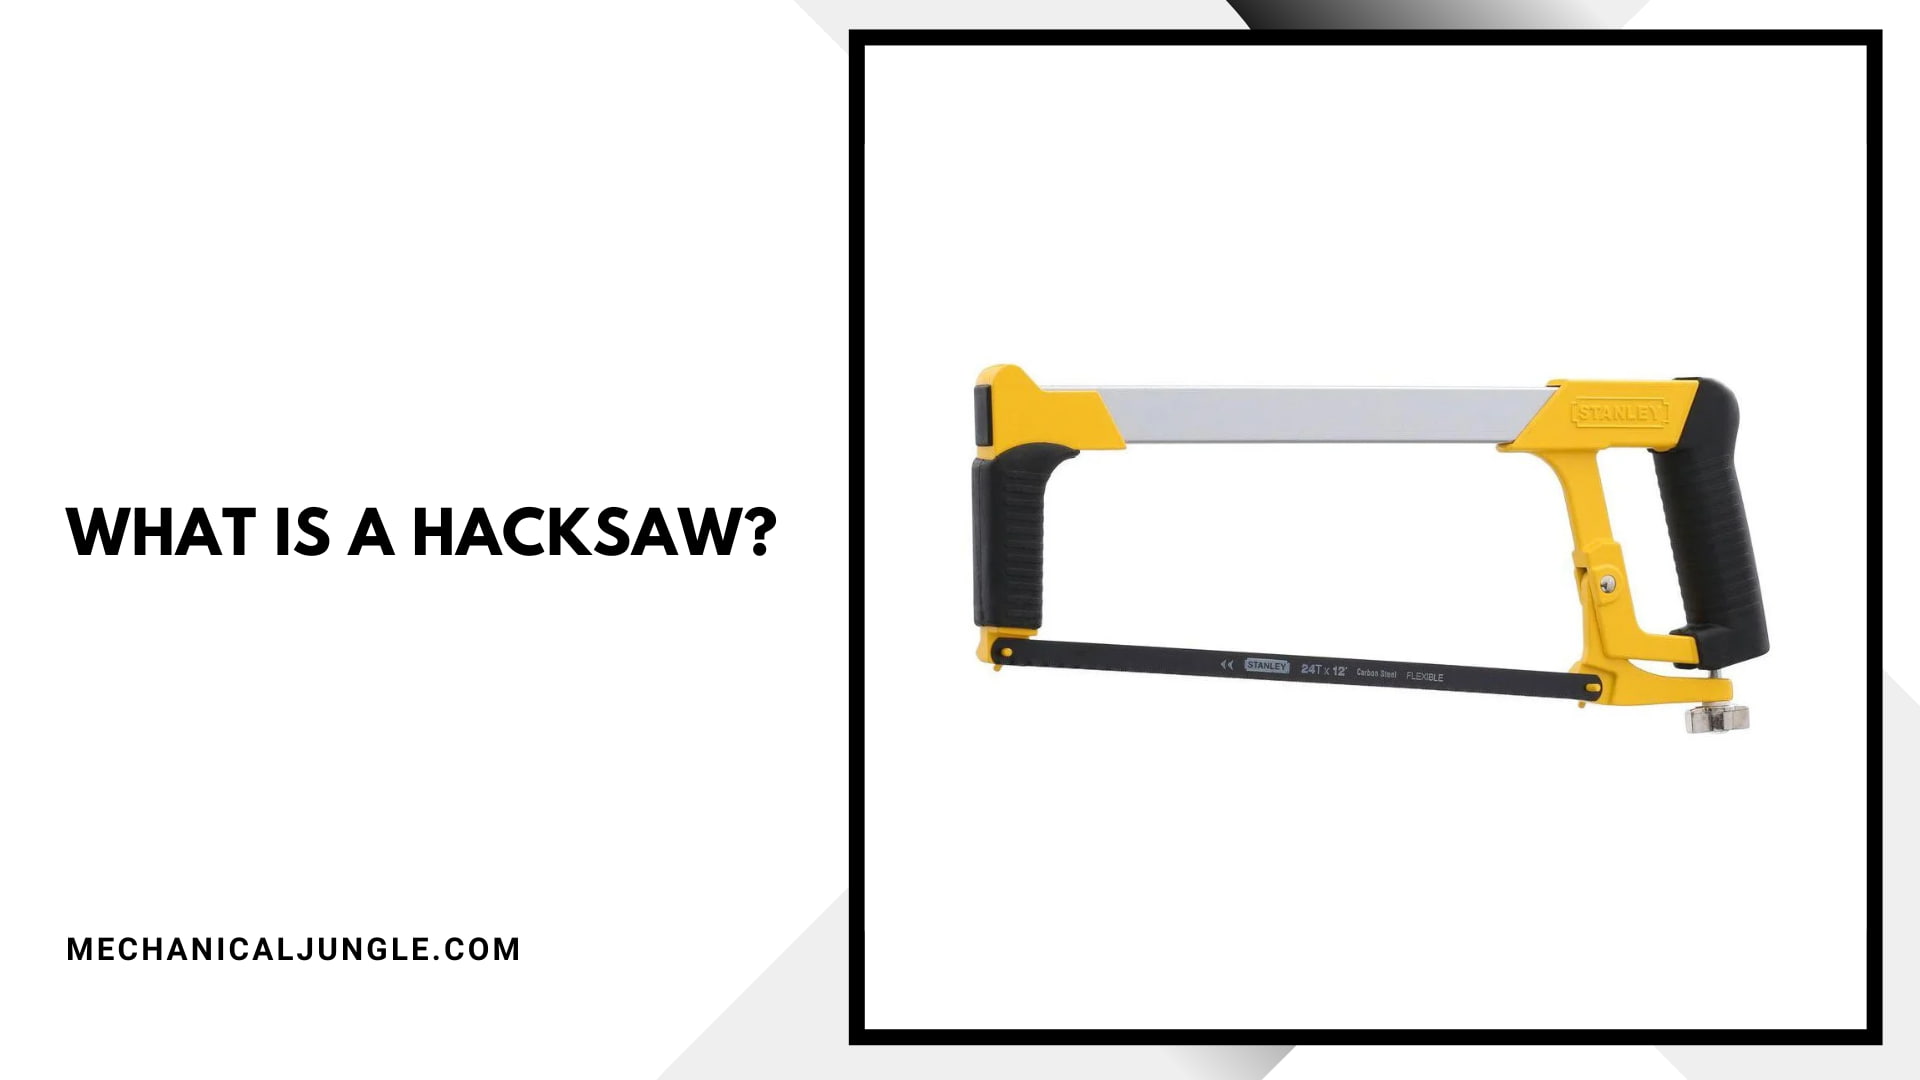 What Is a Hacksaw?